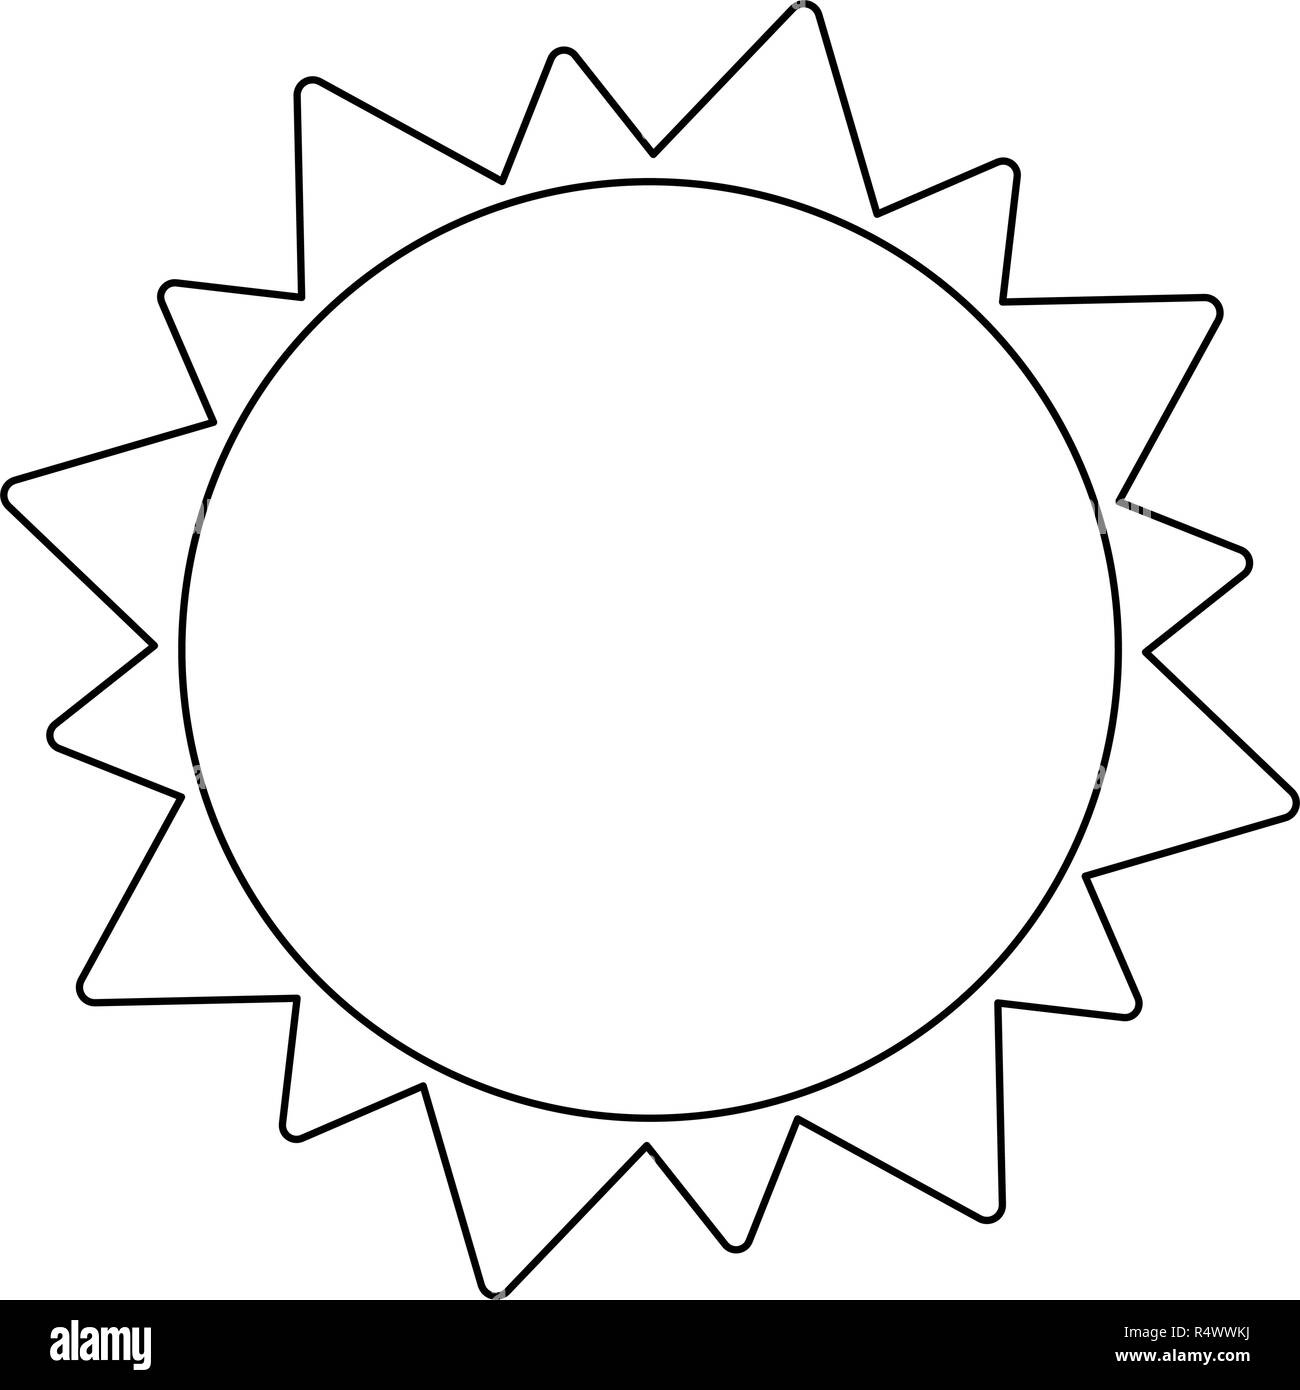 Sun isolated symbol black and white Stock Vector